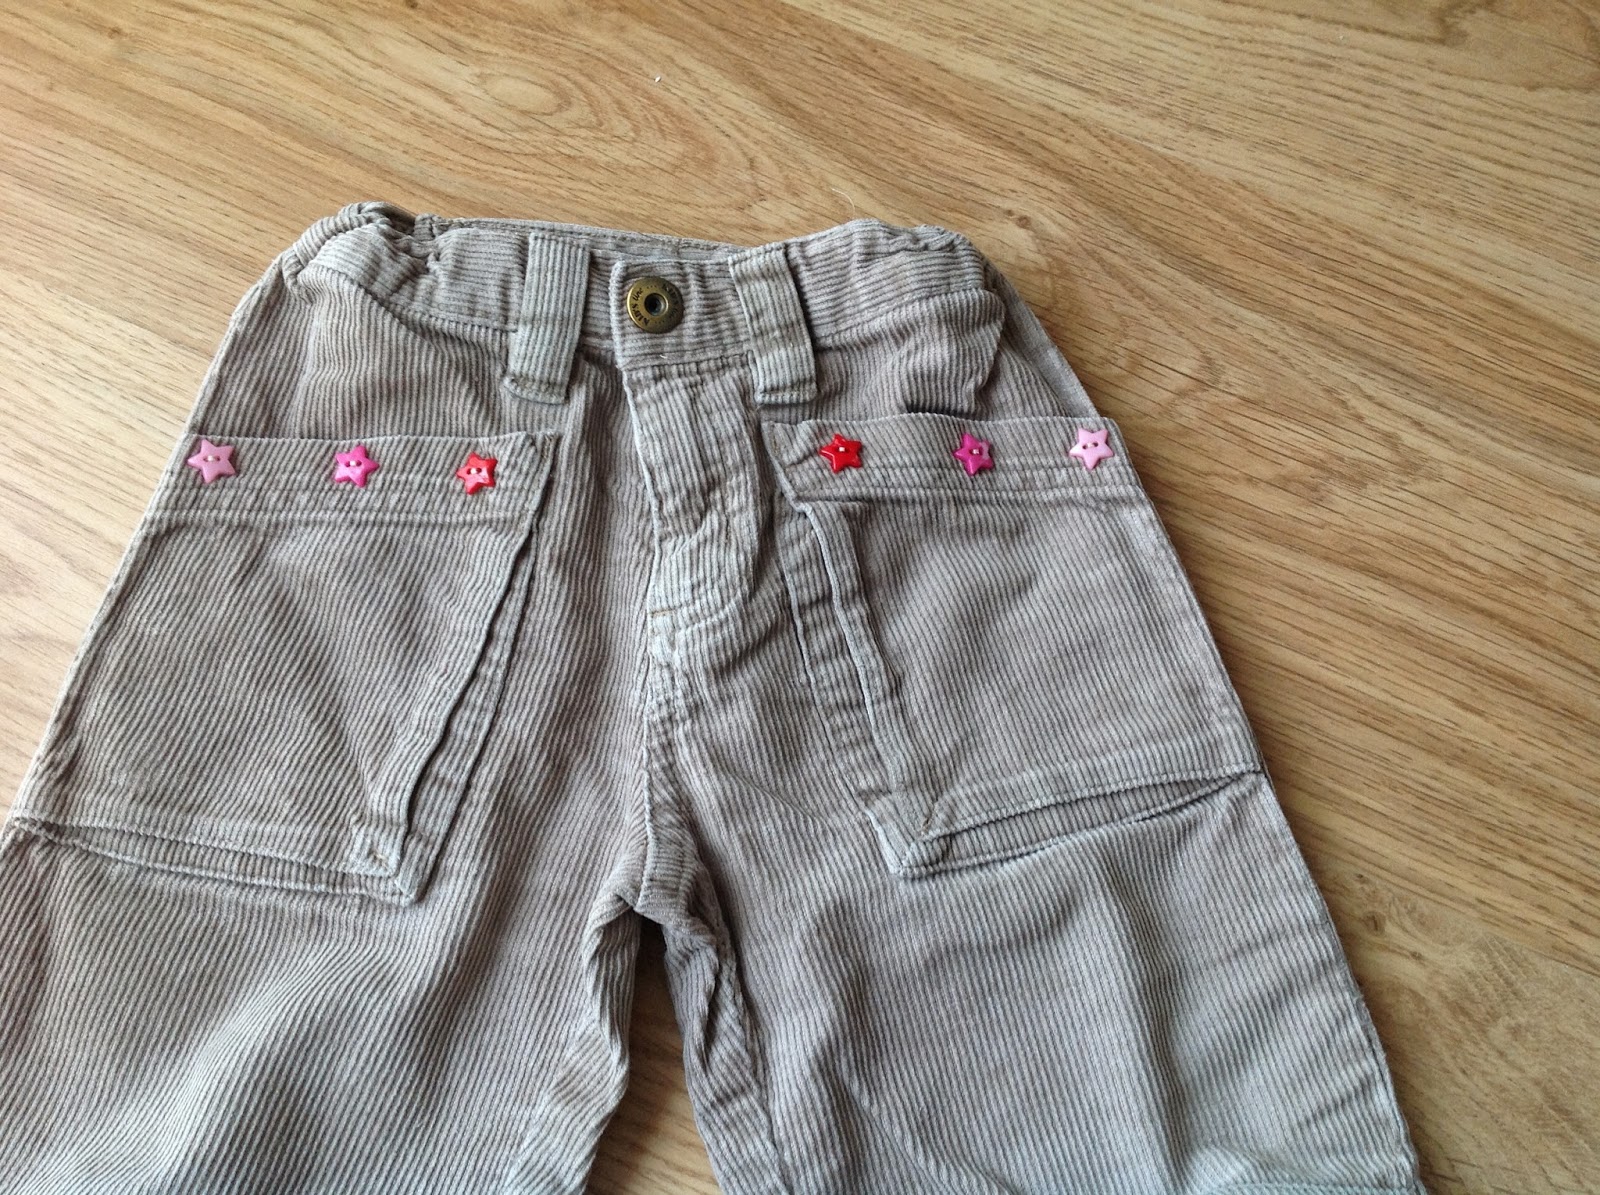 3 easy ways to reuse and upcycle kids pants |Keeping it Real